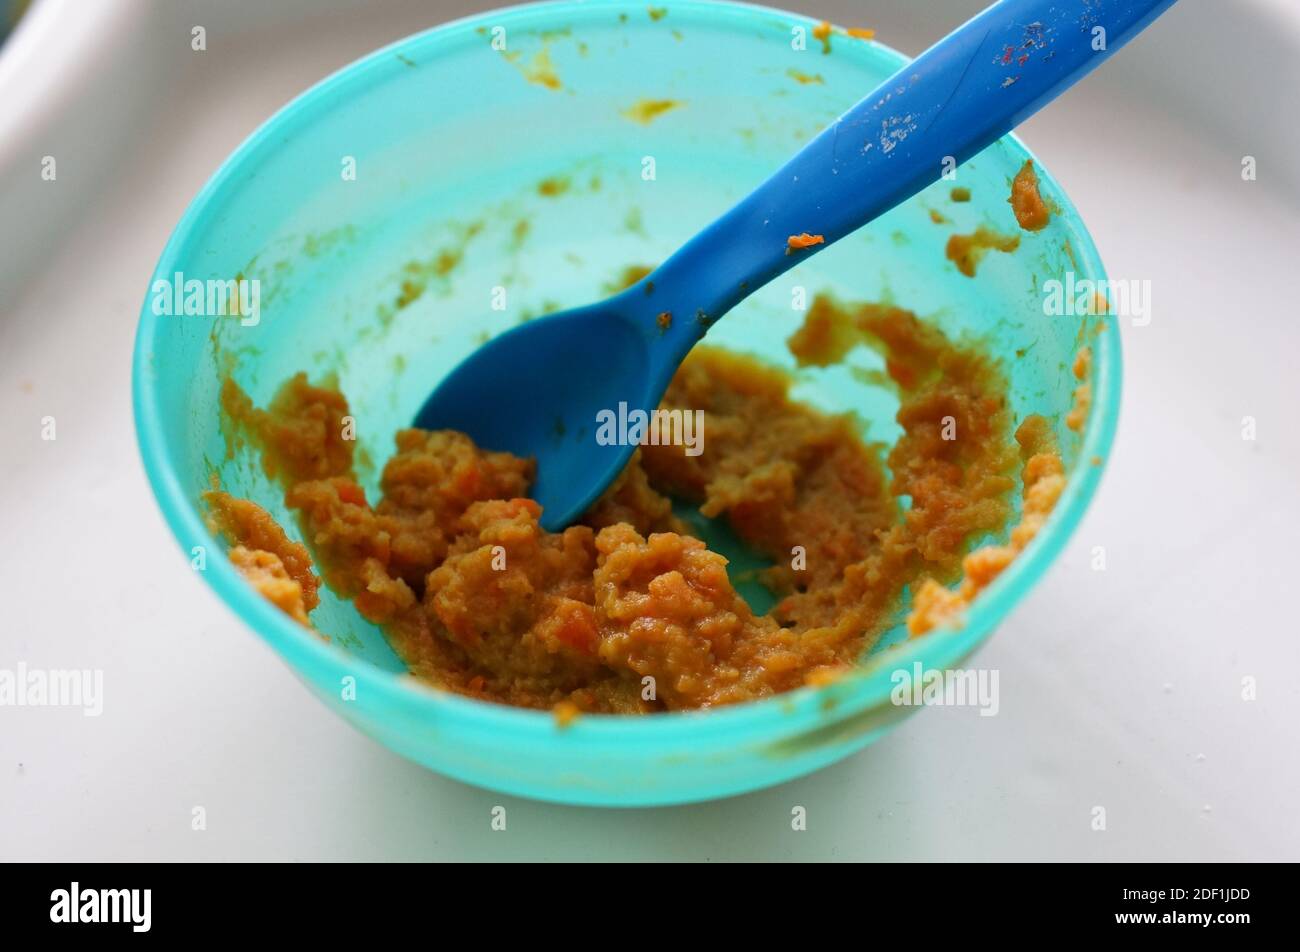 A closeup shot of a mash food with a plastic spoon and plastic bowl on a table Stock Photo